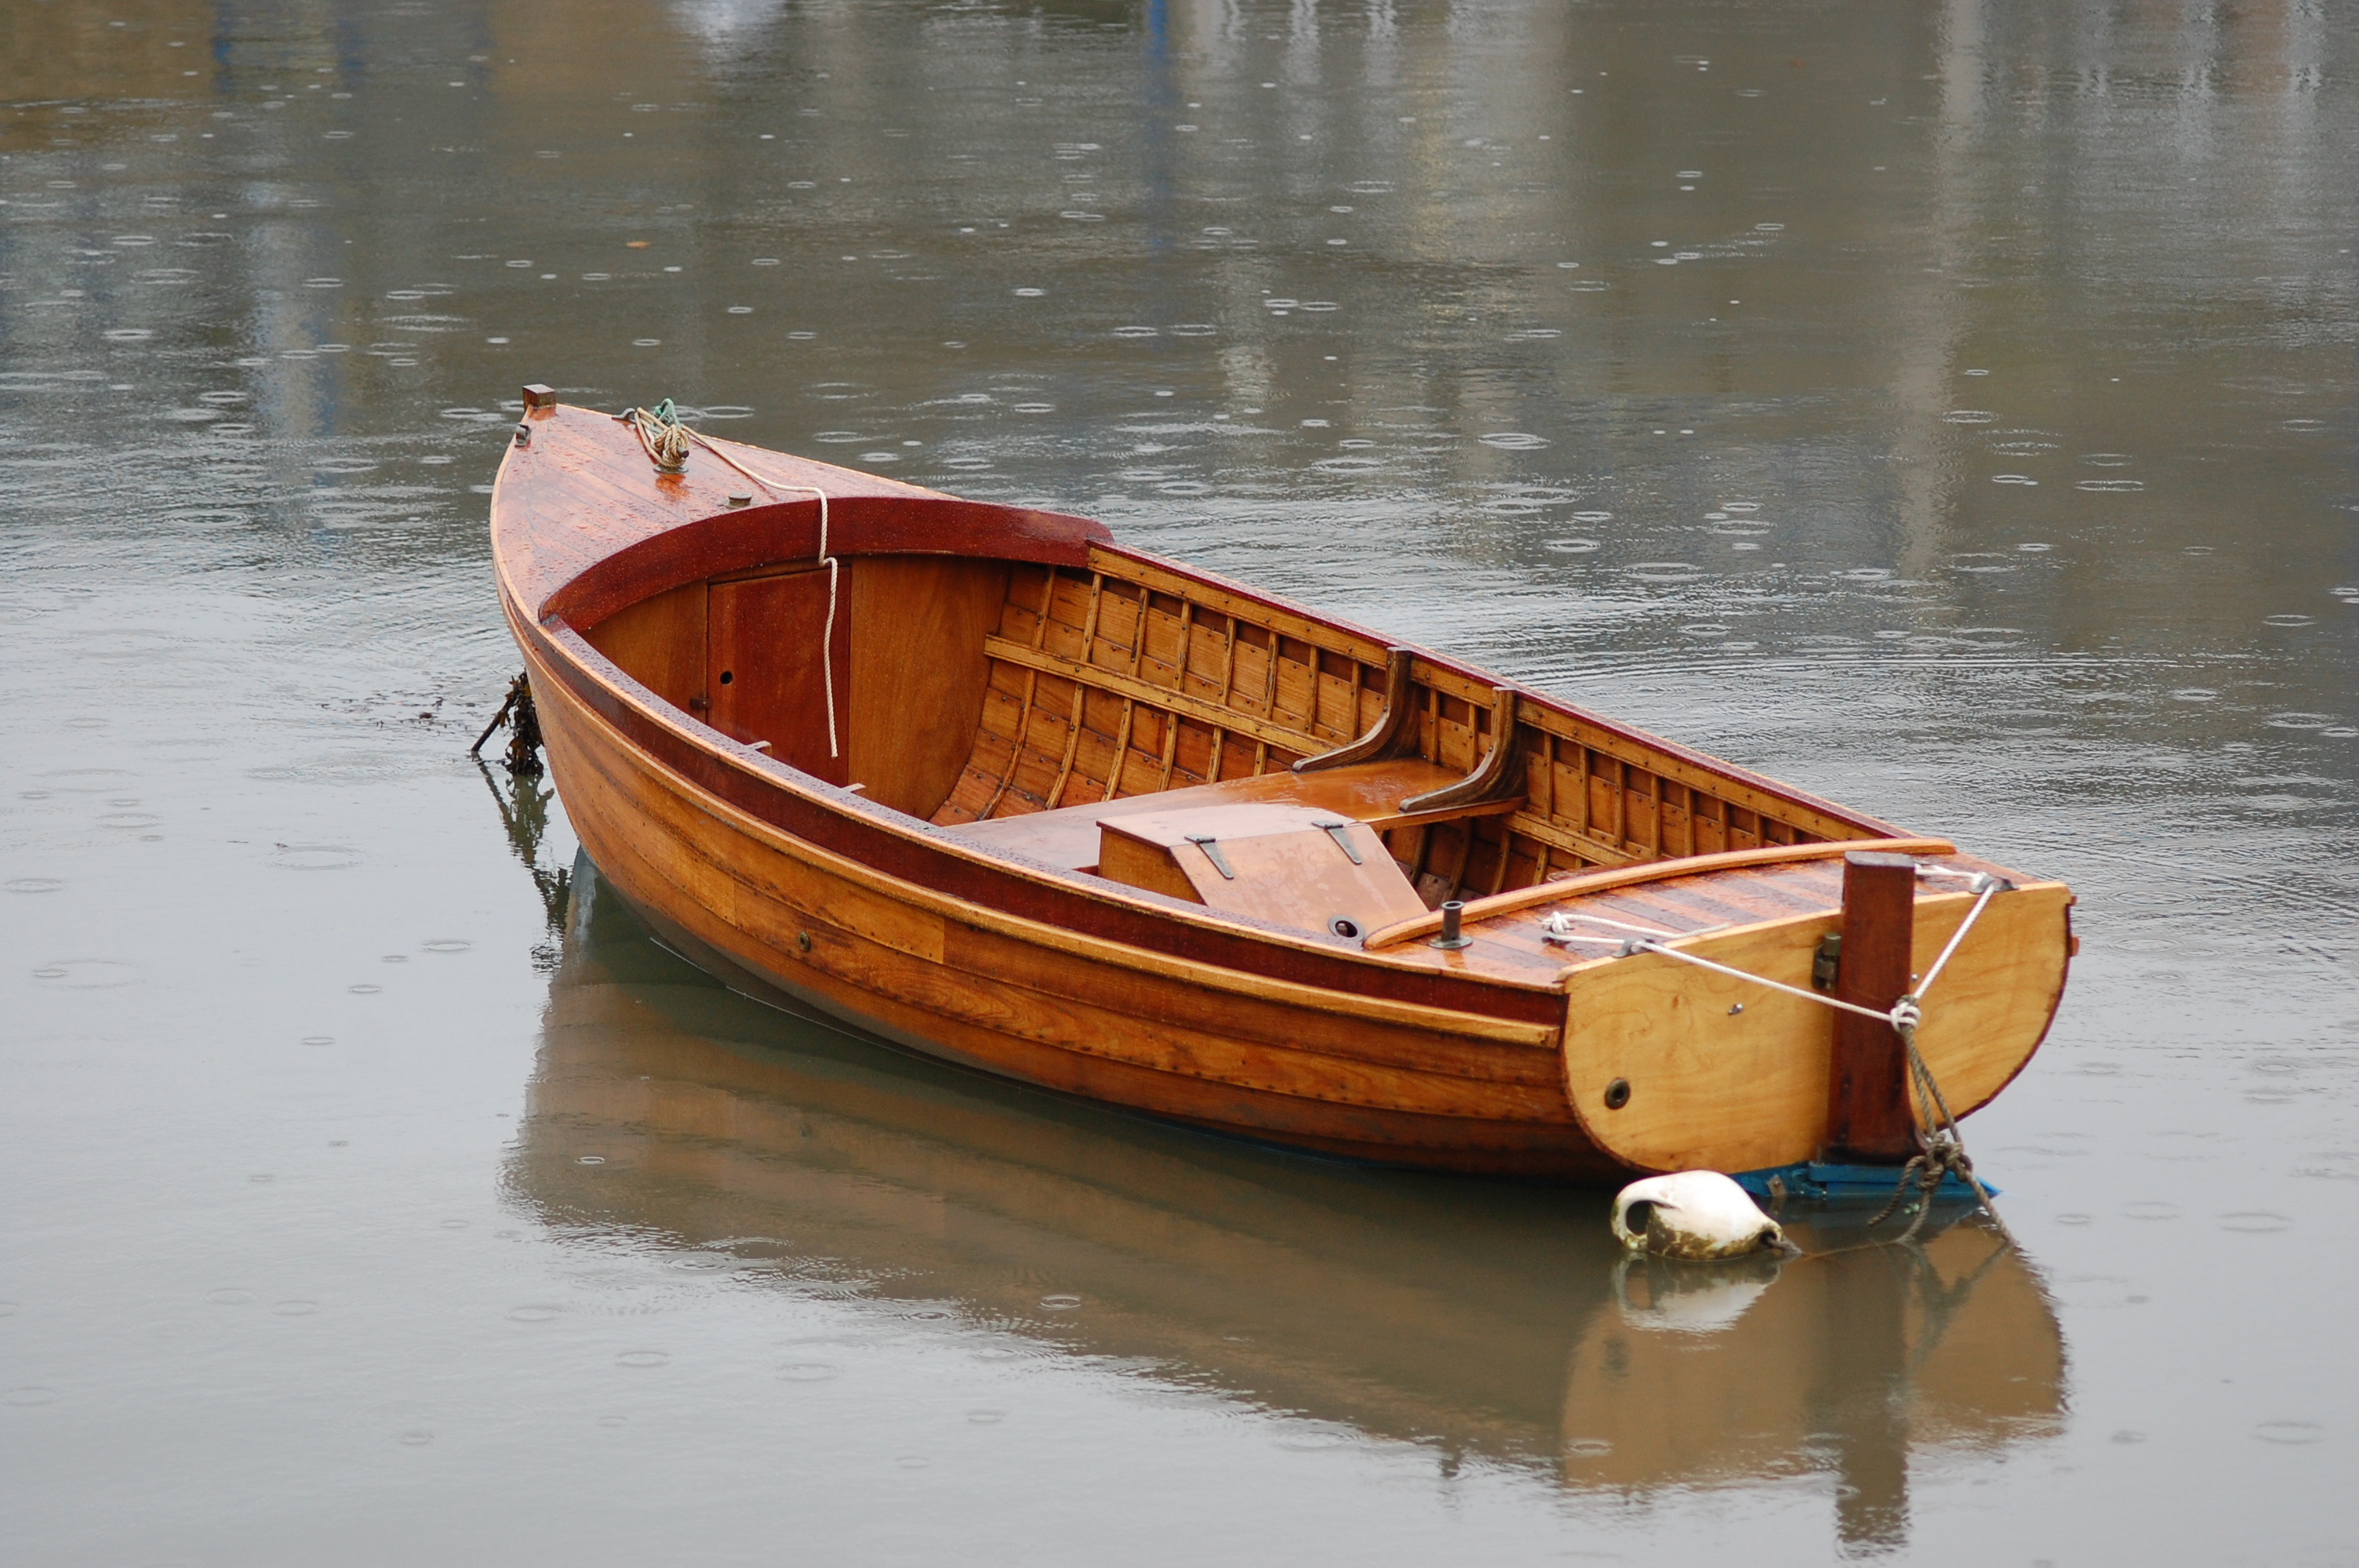 Wooden Boats: How to survey - The International Institute of Marine  Surveying (IIMS)